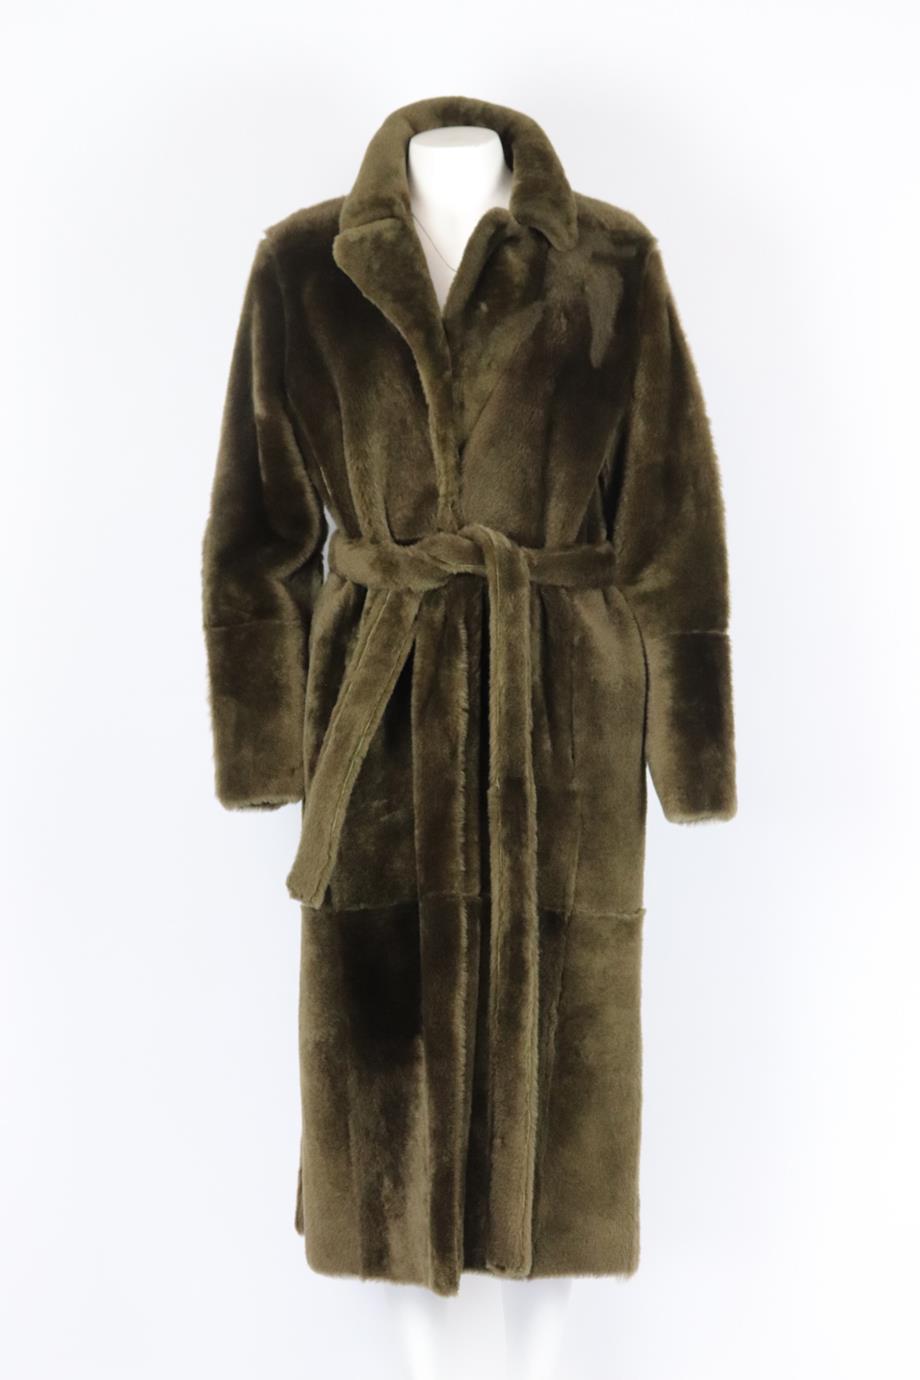 Yves Salomon reversible shearling coat. Green. Long sleeve, v-neck. Belt fastening at front. 100% Leather; fabric2: 100% lamb. Size: FR 42 (UK 14, US 10, IT 46). Shoulder to shoulder: 17.5 in. Bust: 45 in. Waist: 42 in. Hips: 48 in. Length: 48 in.